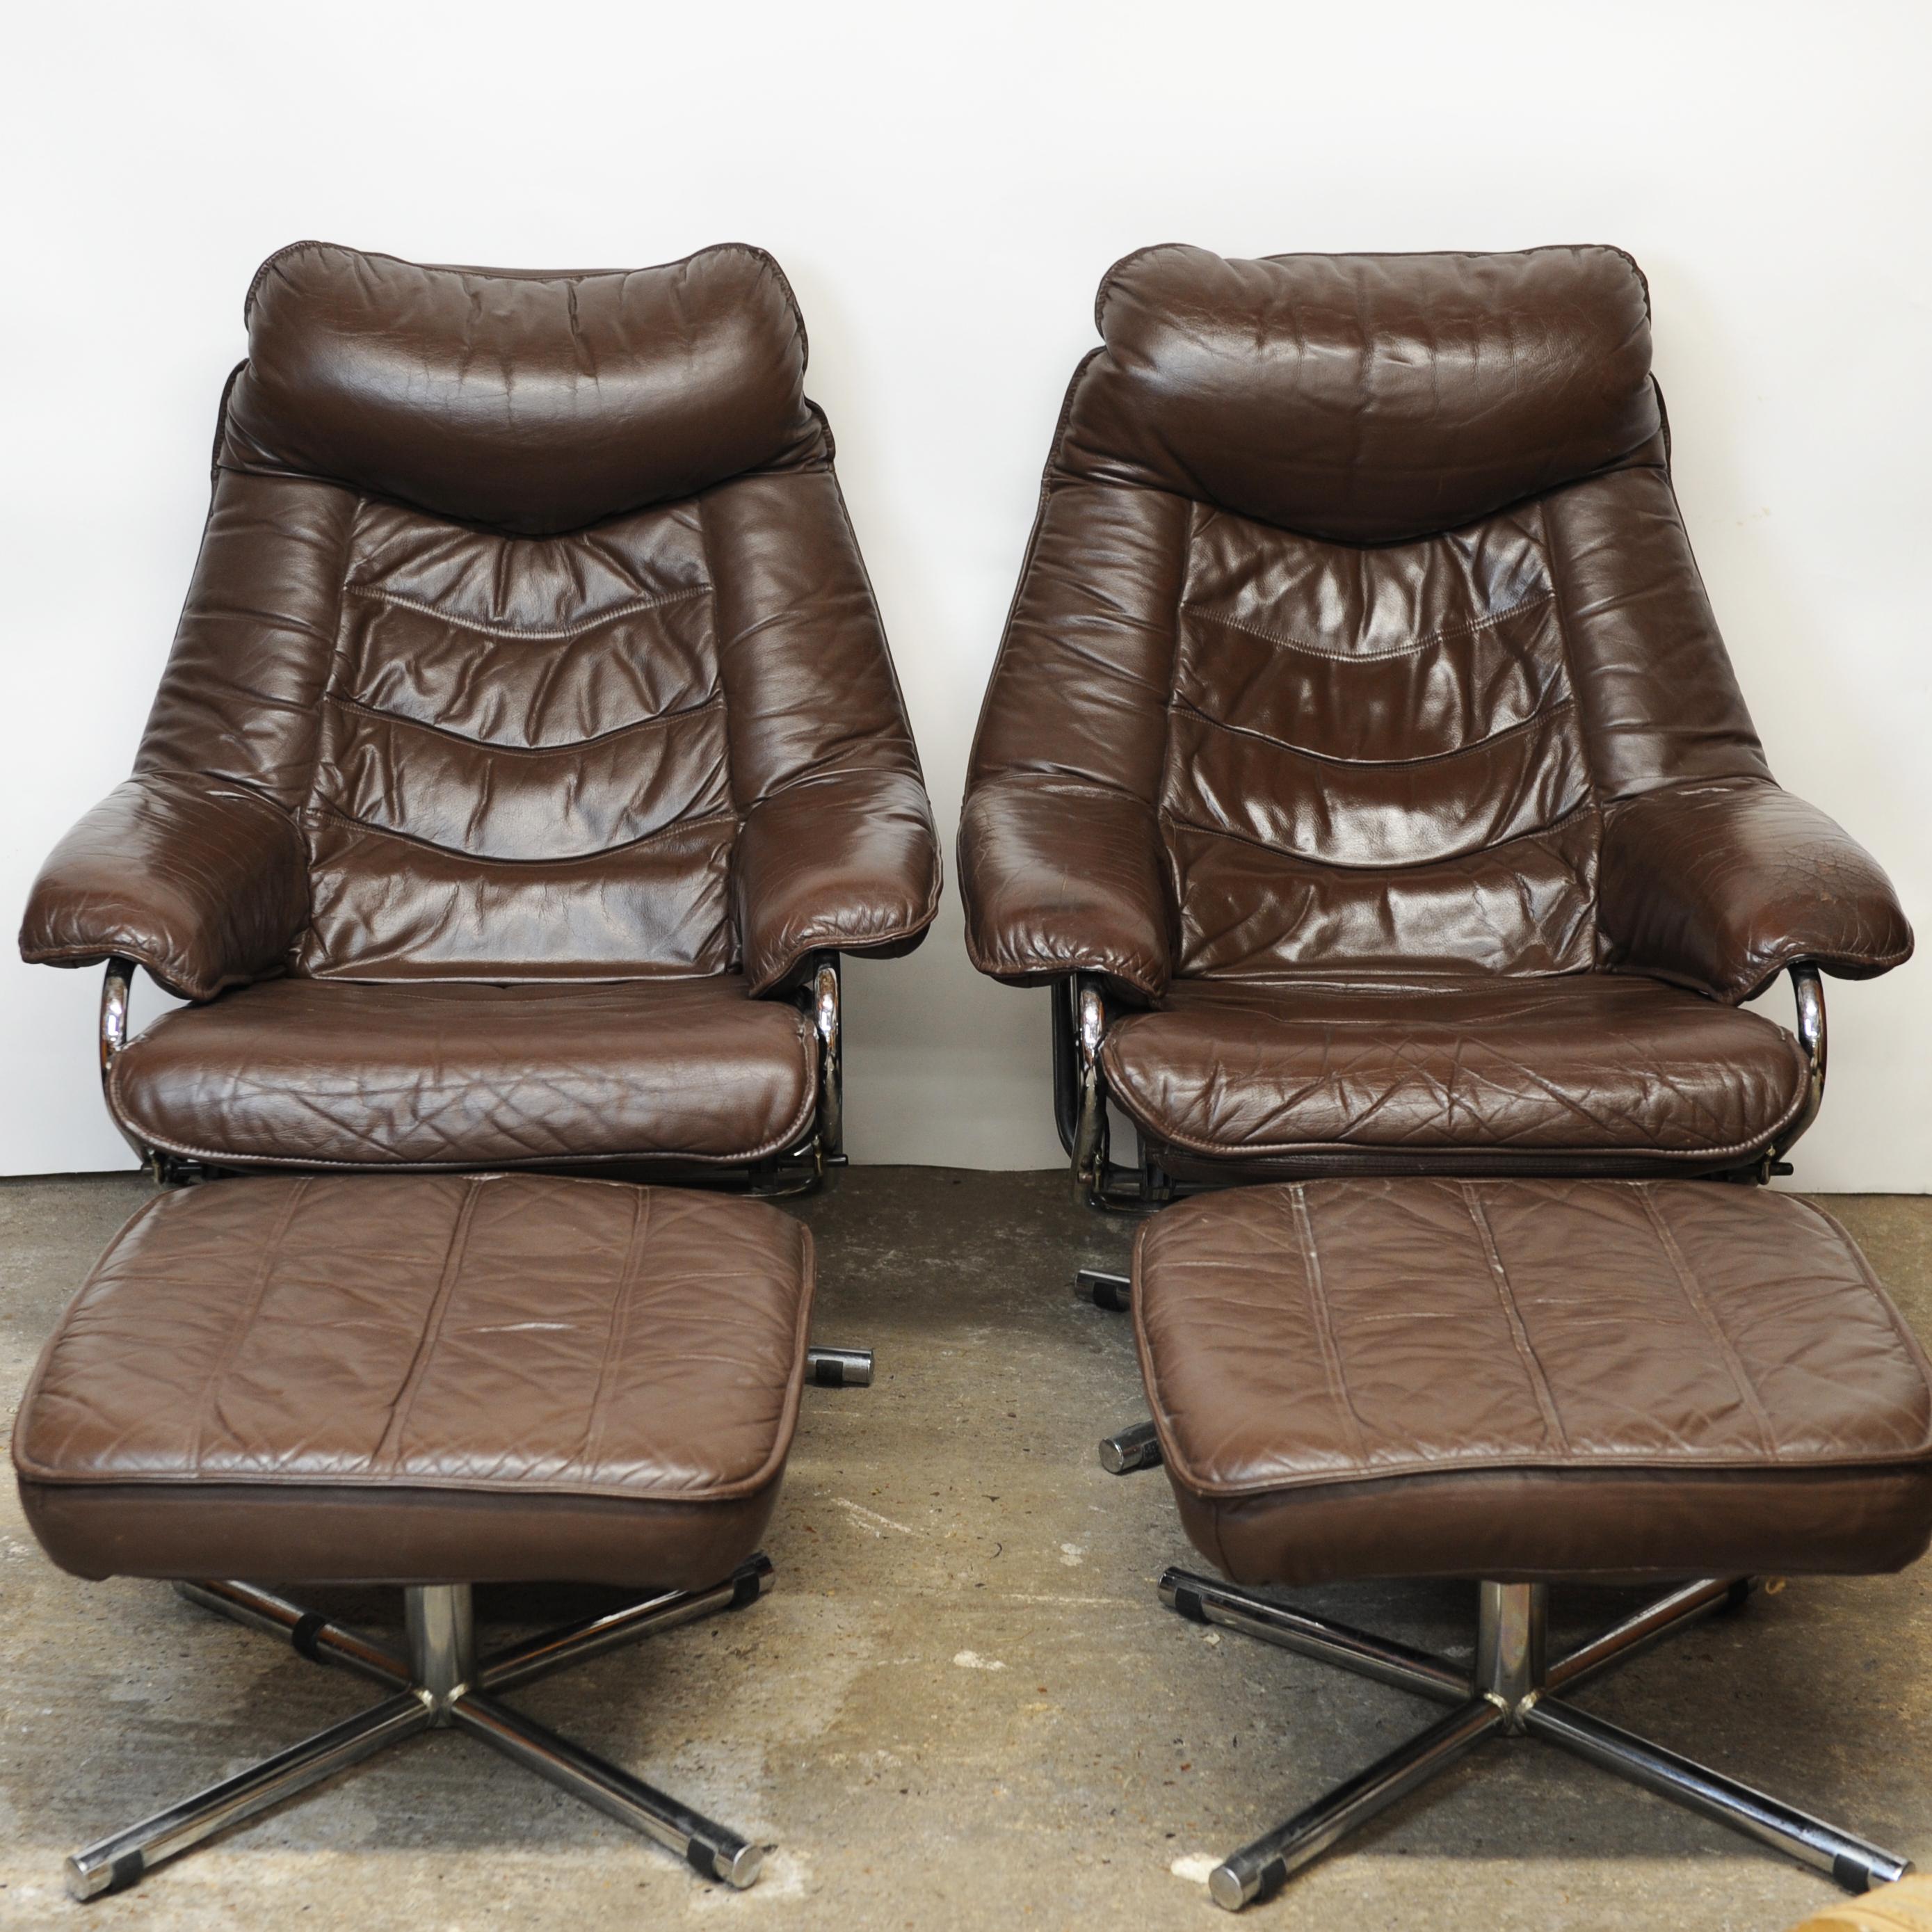 Pair of Norwegian Lounge Chairs with Footstools in Brown Leather by Skoghaus  For Sale 2